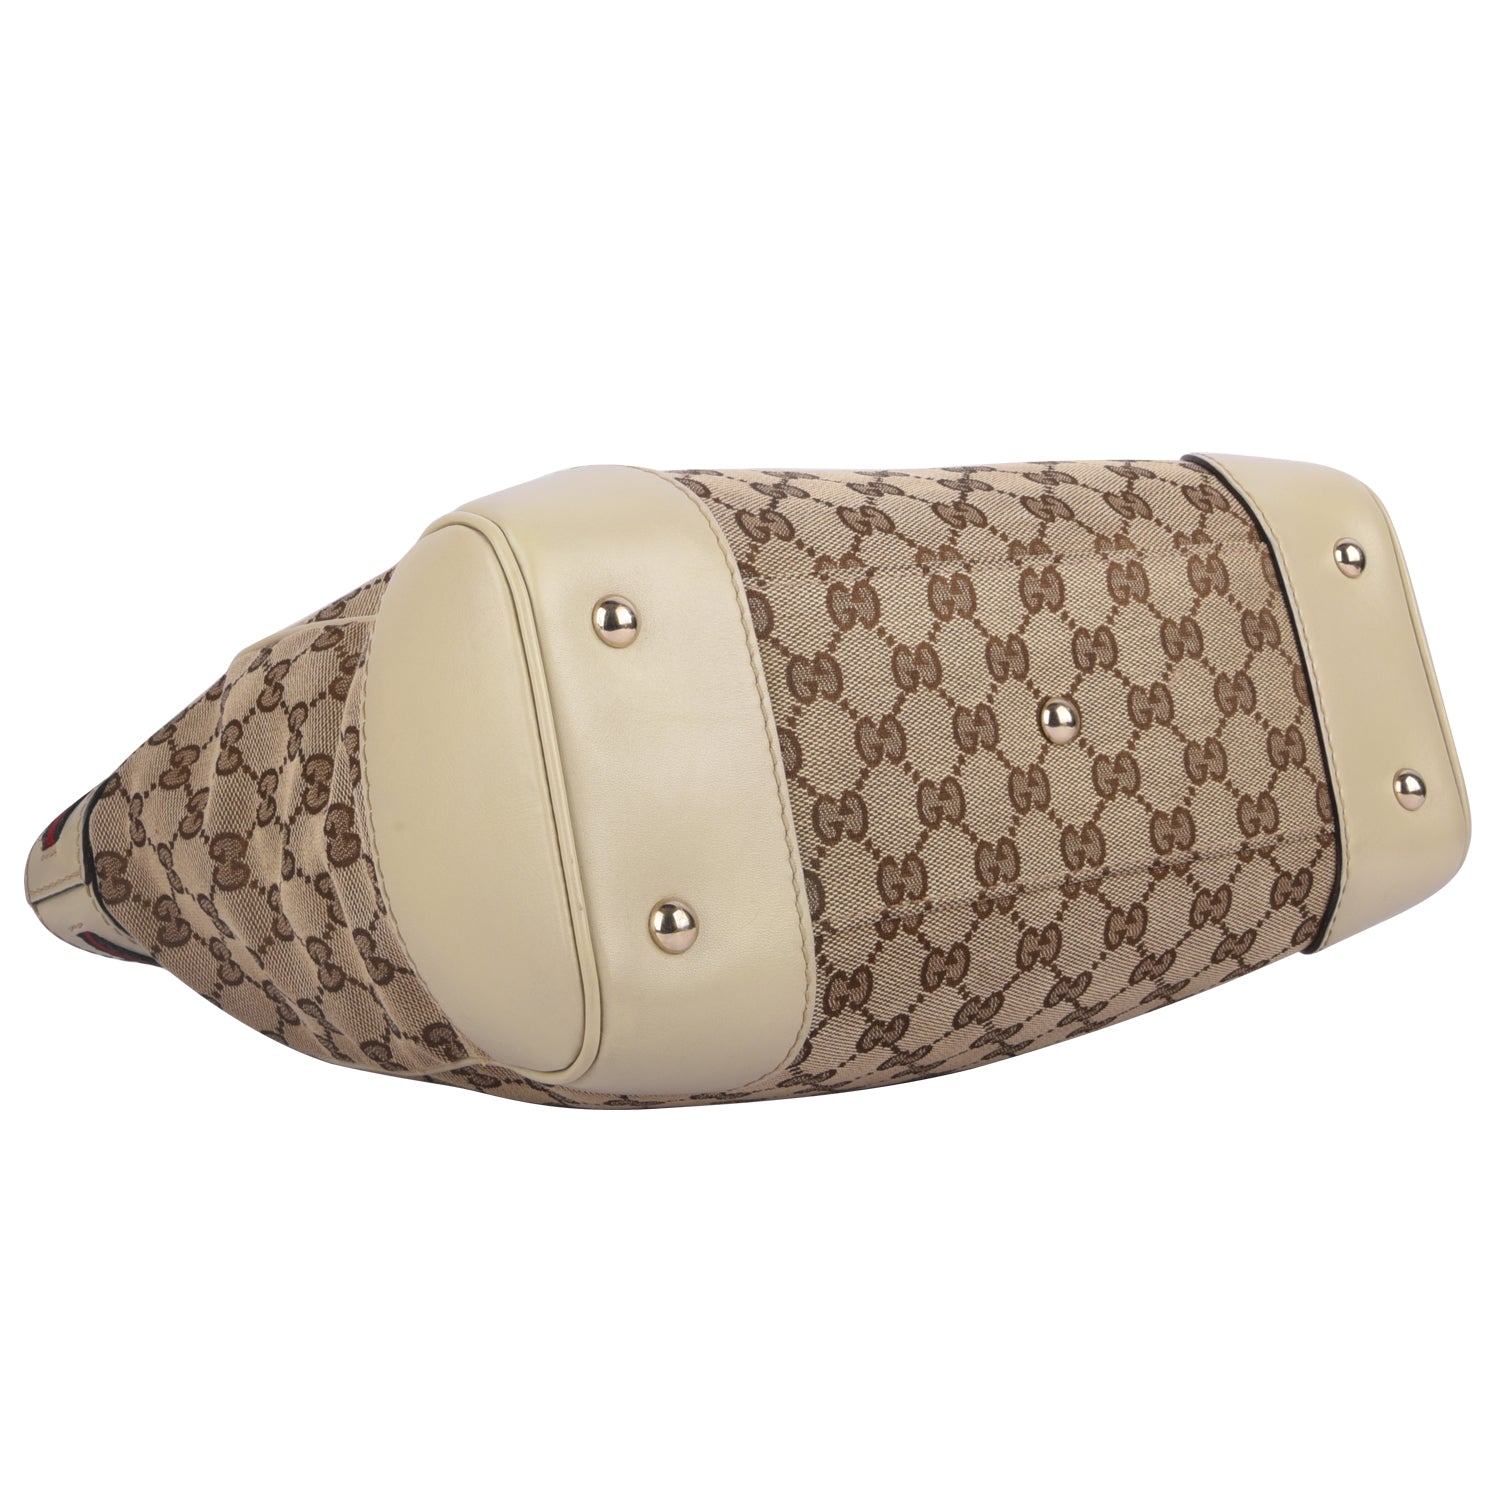 Gucci Mayfair Beige Fabric White Leather Brown Tote